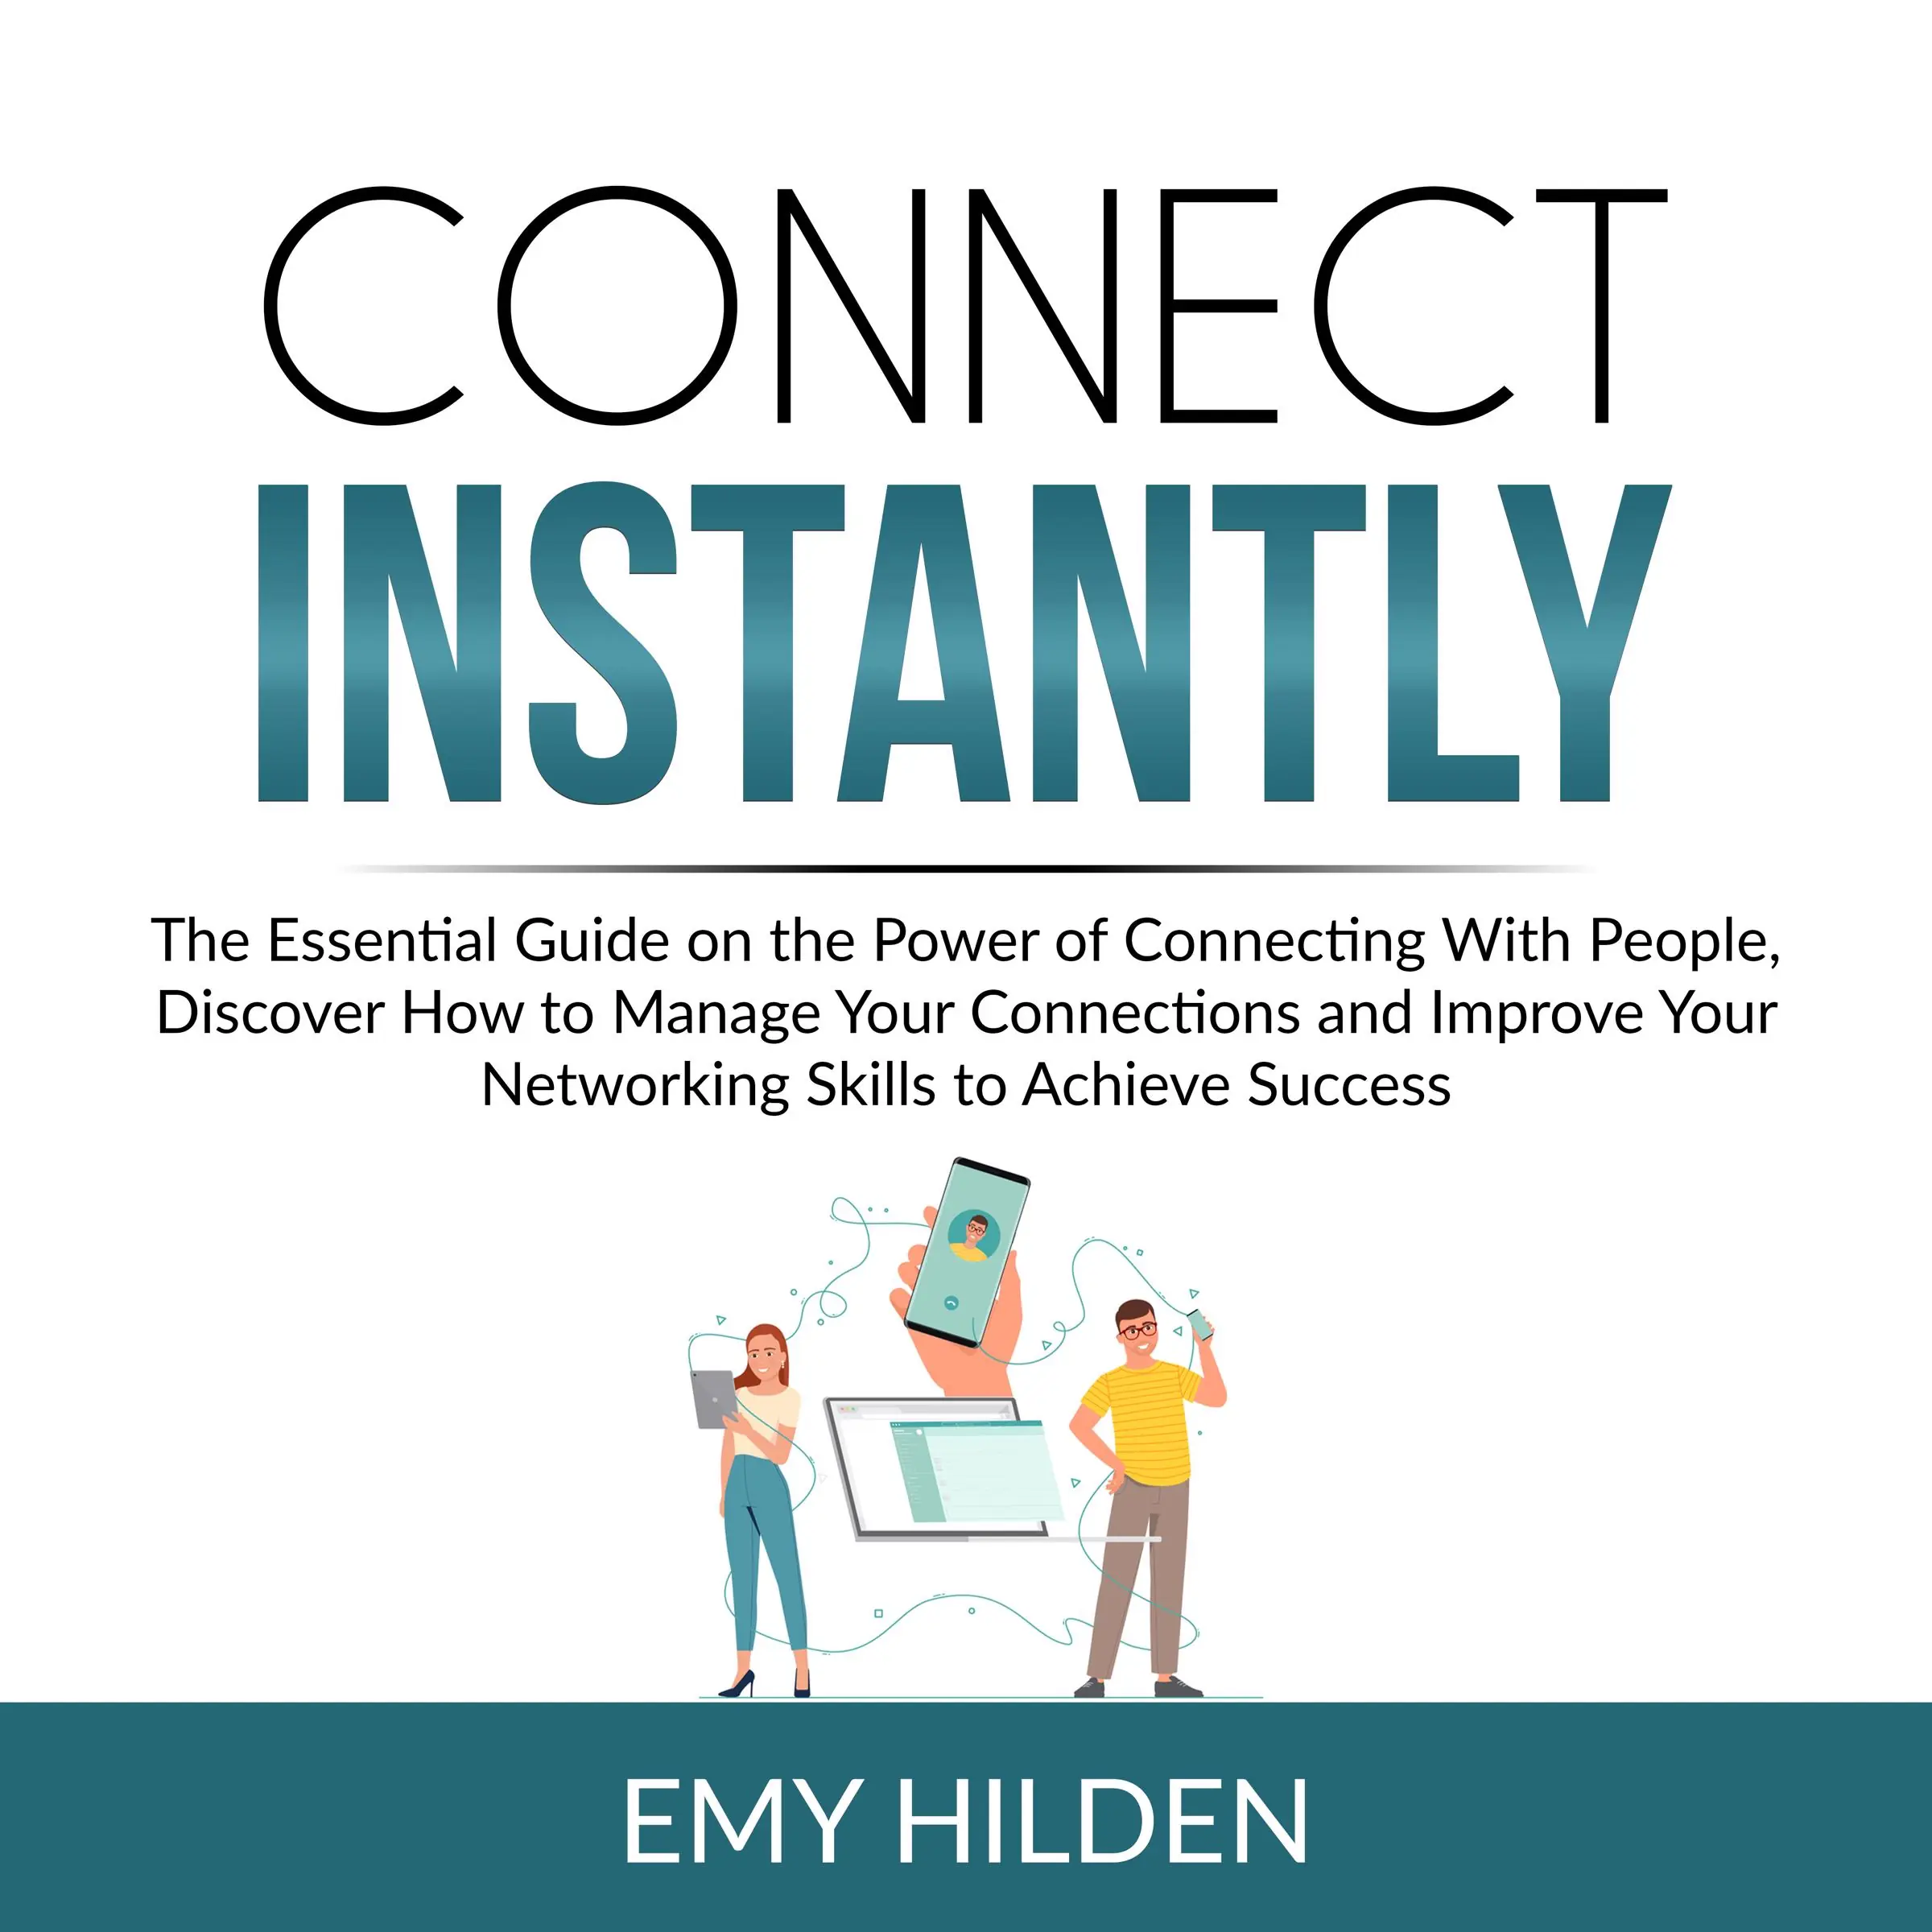 Connect Instantly: The Essential Guide on the Power of Connecting With People, Discover How to Manage Your Connections and Improve Your Networking Skills to Achieve Success Audiobook by Emy Hilden